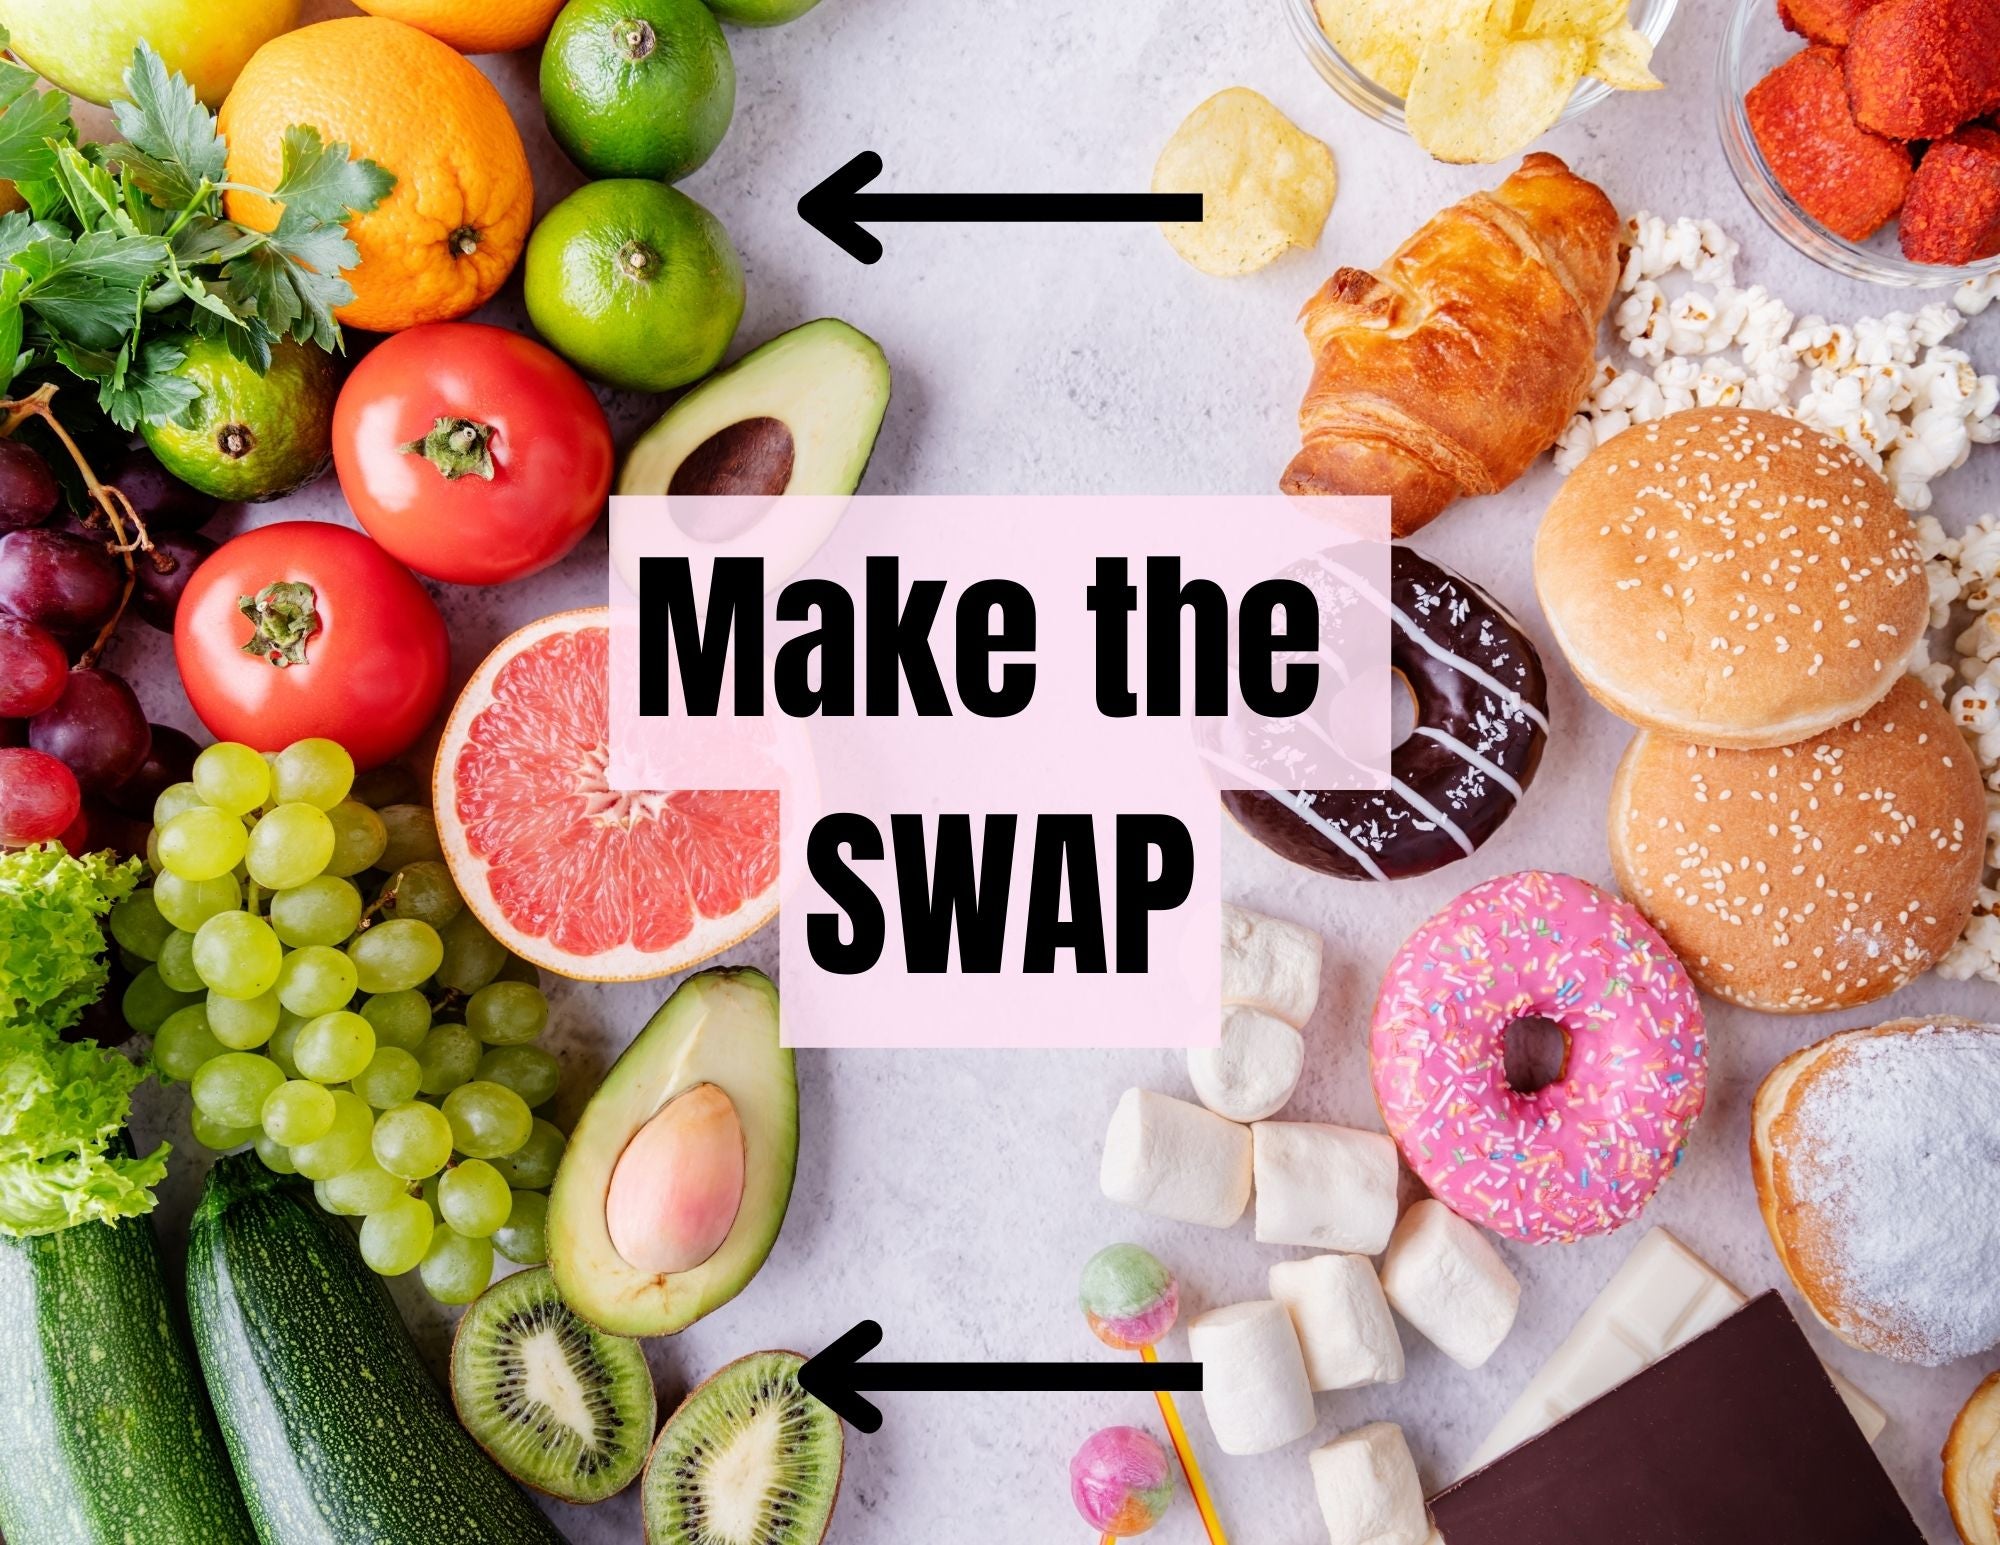 Healthy Swaps To Consider [Recipe Included]